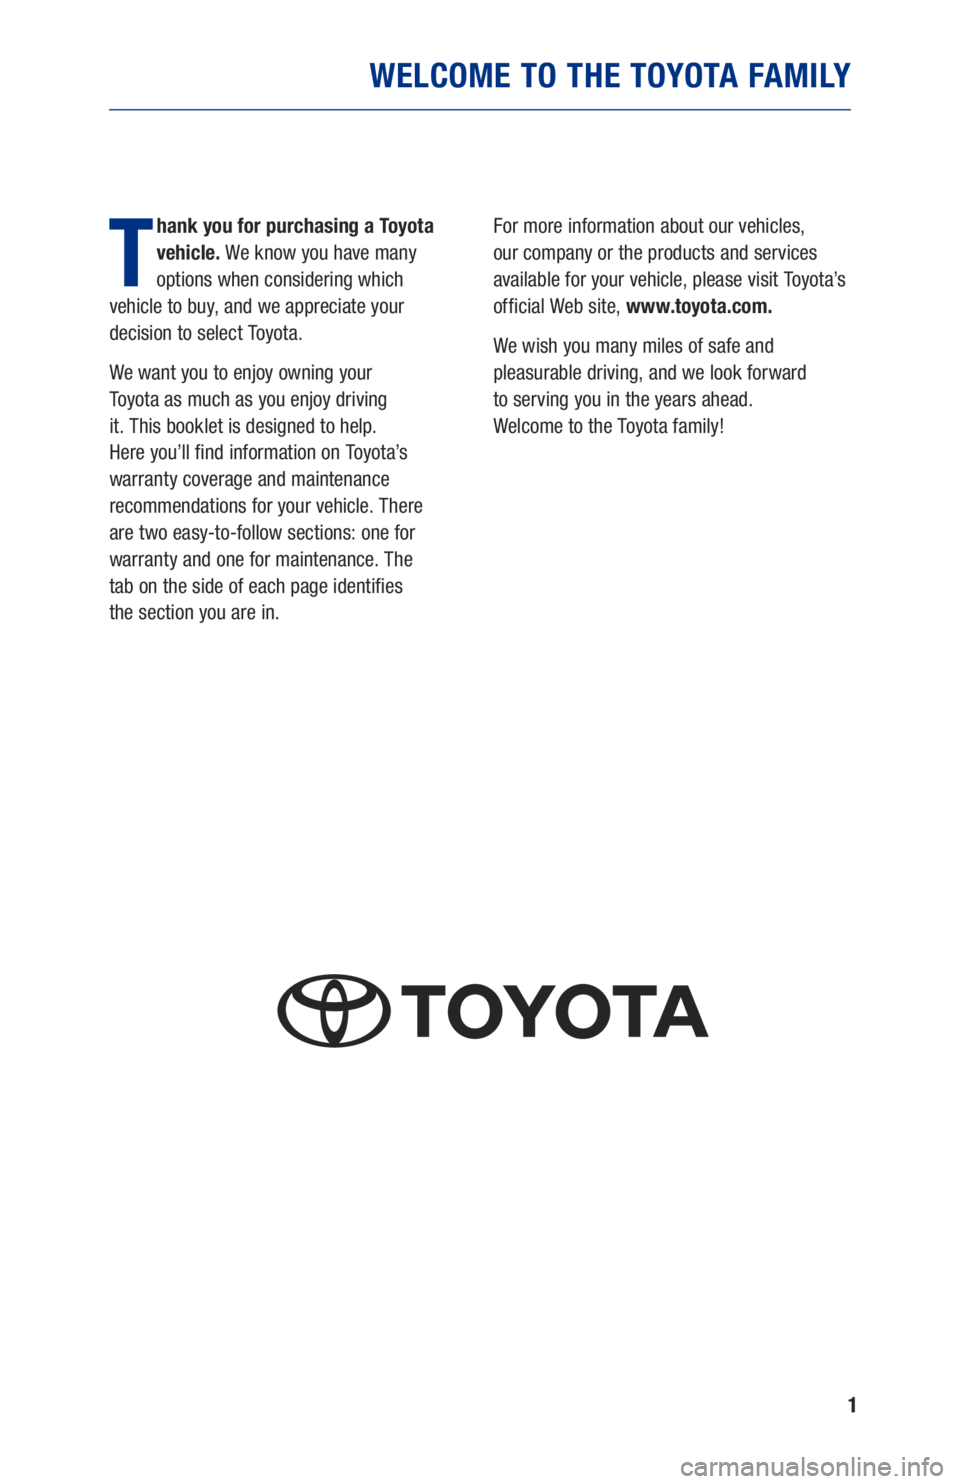 TOYOTA COROLLA HATCHBACK 2019  Warranties & Maintenance Guides (in English) 1
WELCOME TO THE TOYOTA FAMILY
T
hank you for purchasing a Toyota 
vehicle. We know you have many 
options when considering which  
vehicle to buy, and we appreciate your 
decision to select Toyota.
W